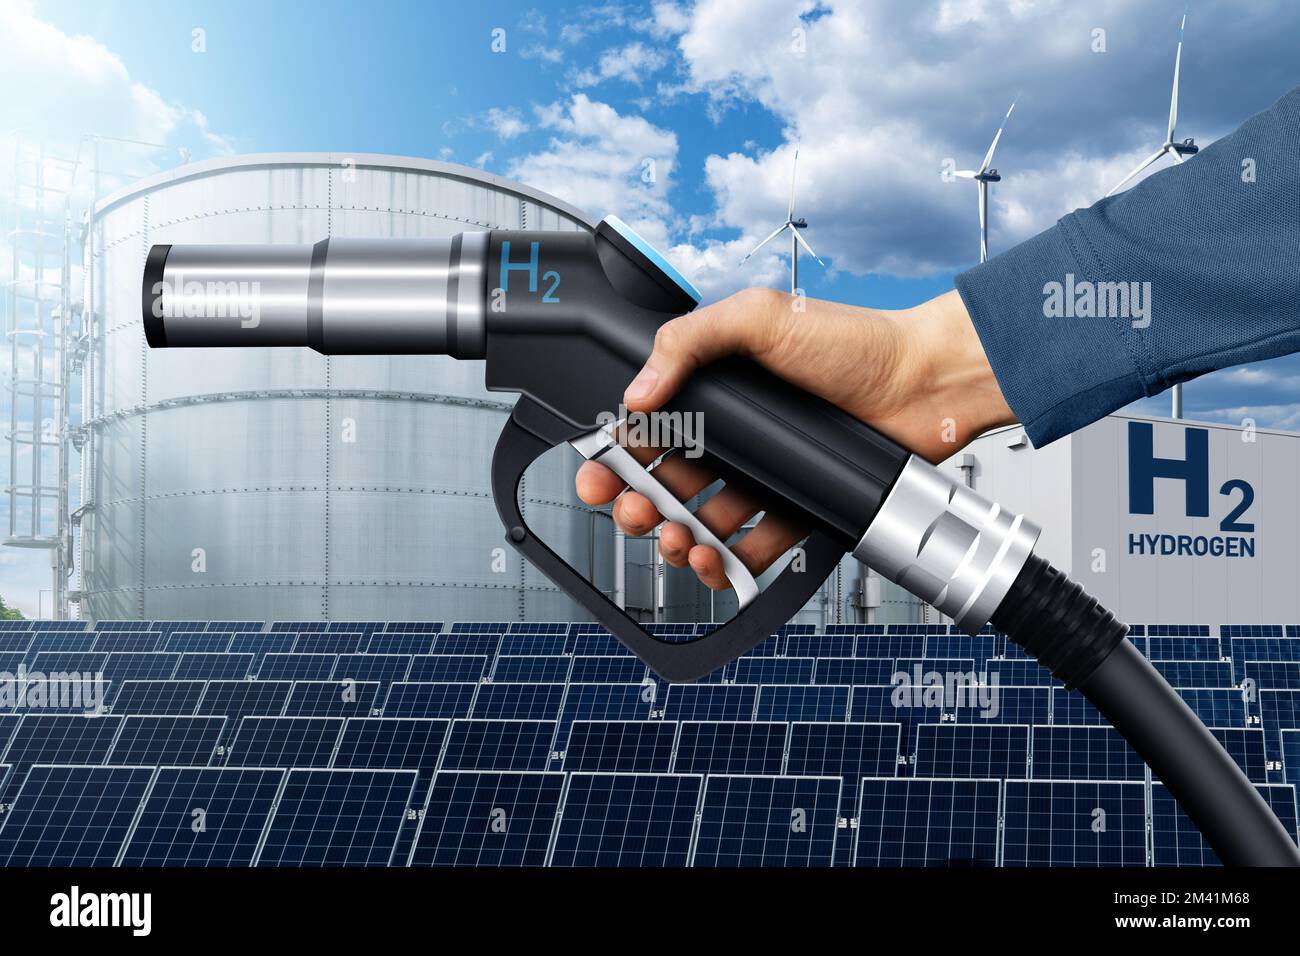 Hand with hydrogen fueling nozzle on a background of H2 factory. Hydrogen production from renewable energy sources concept Stock Photo